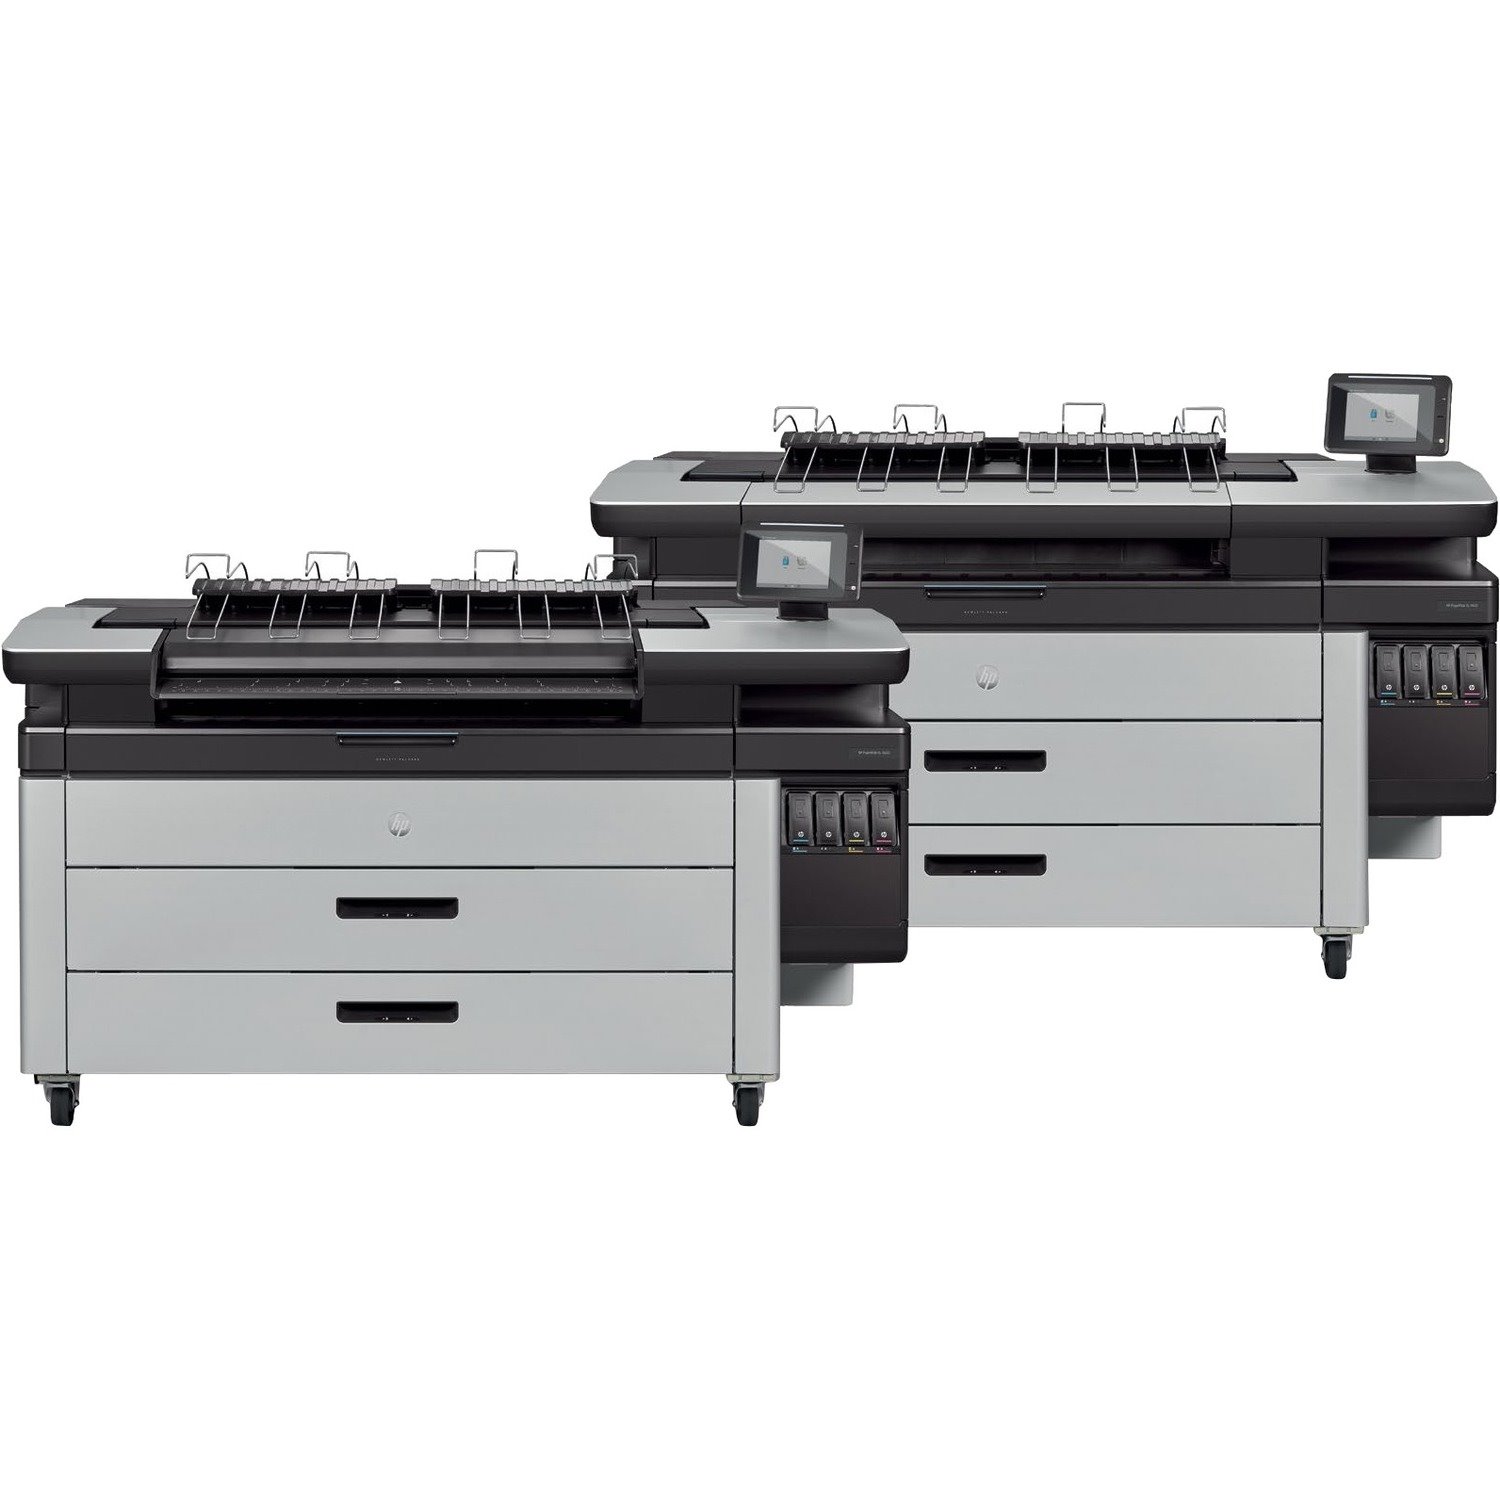 HP PageWide XL 4600 PostScript Page Wide Array Large Format Printer - Includes Printer, Scanner - 40" Print Width - Color